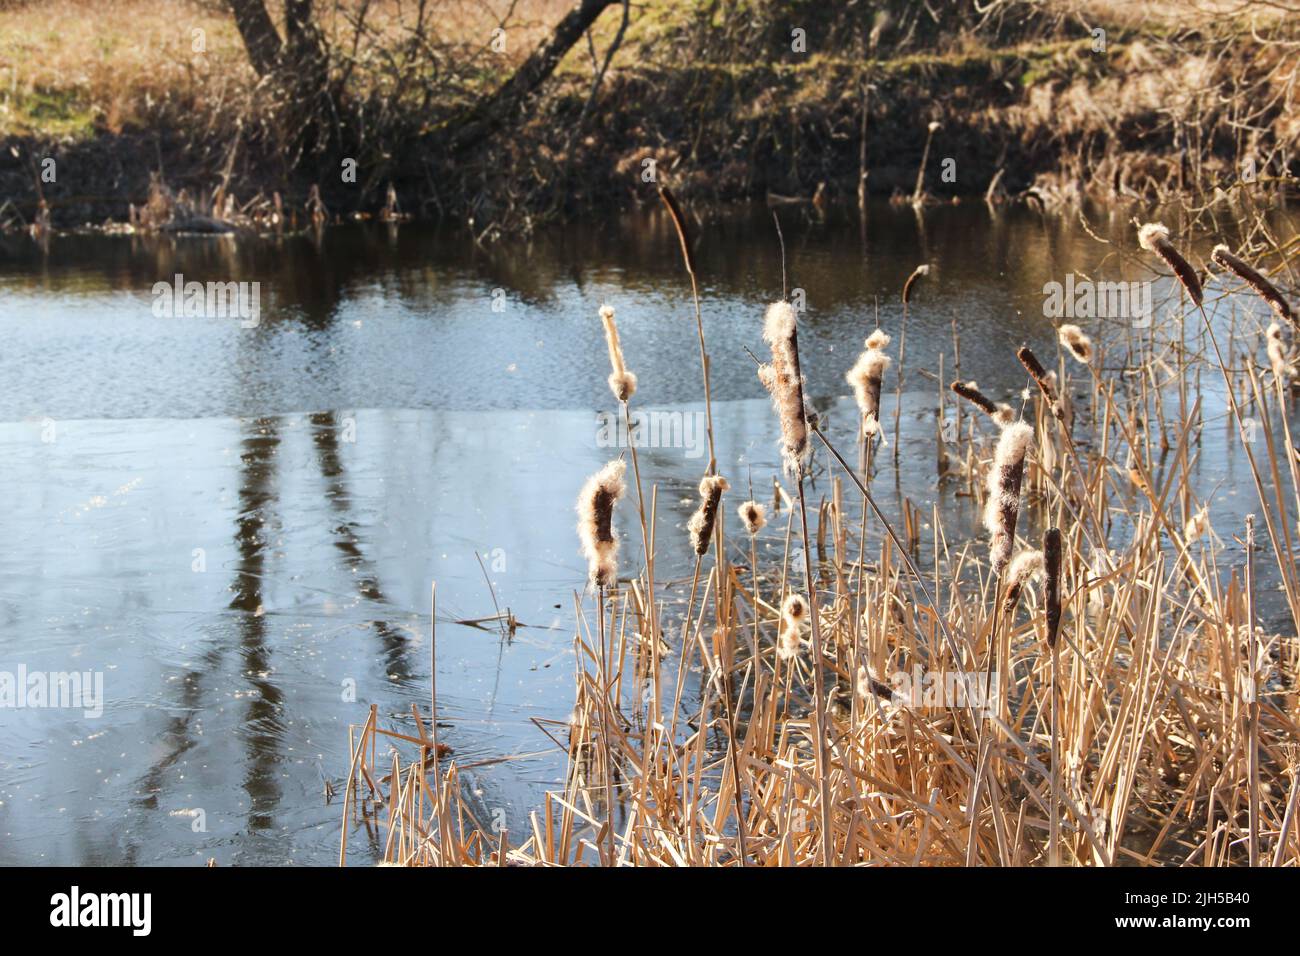 The peaceful panorama of a reed plant in front of the lake. Reeds grow at the lake edge. Stock Photo